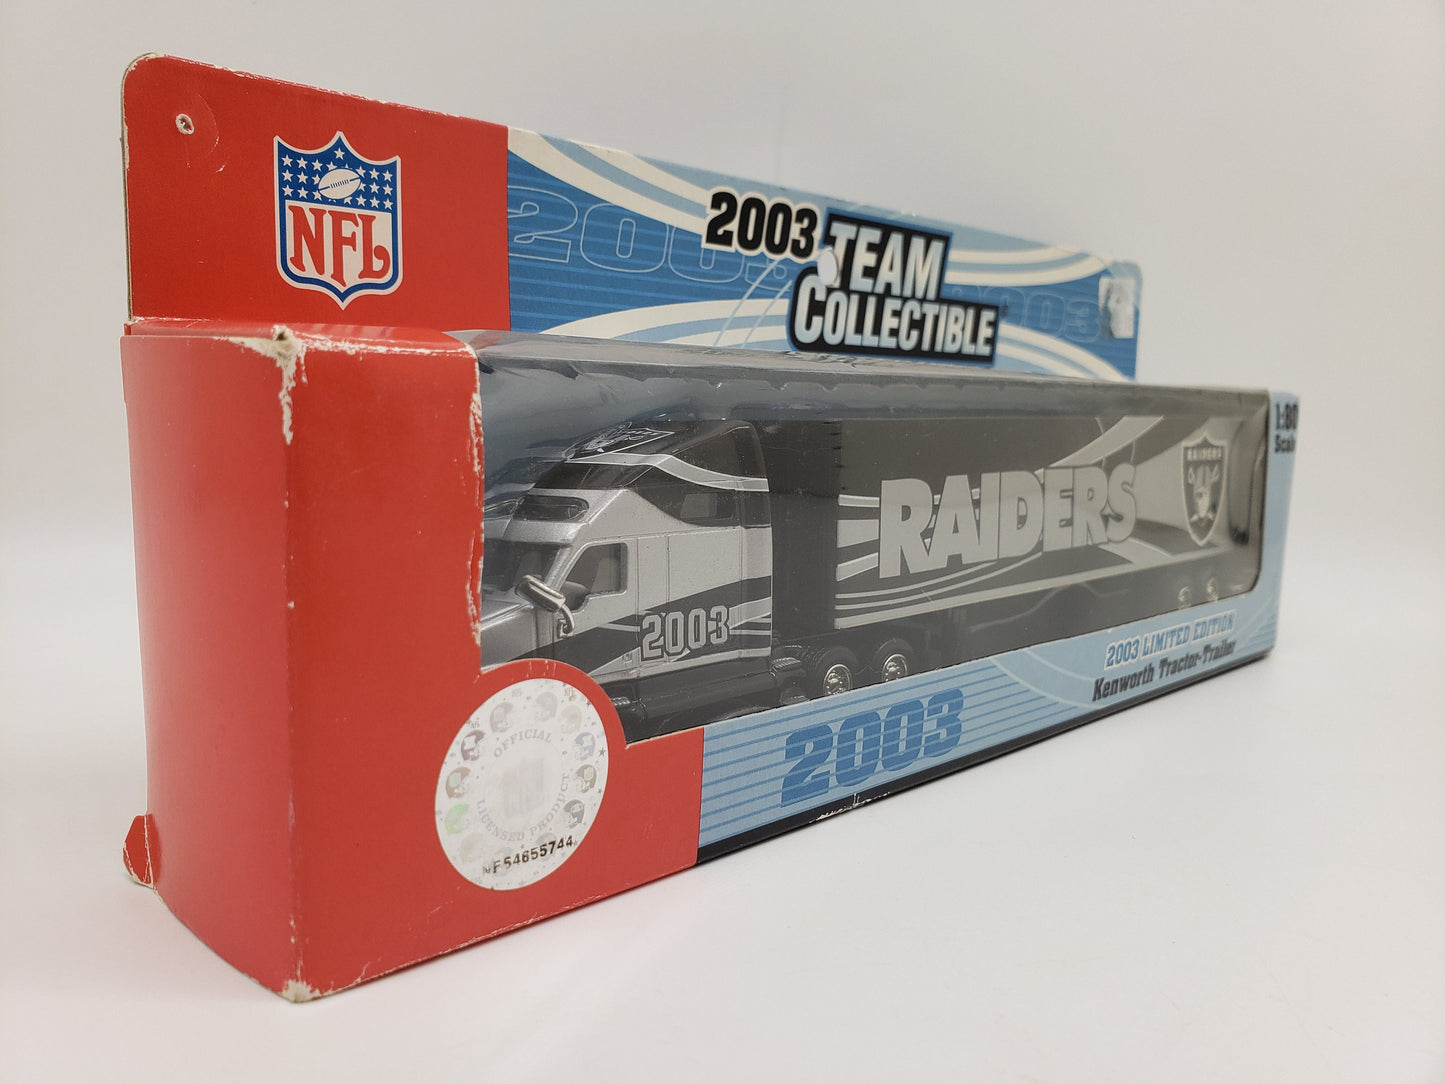 Kenworth Tractor-Trailer Oakland Raiders Silver and Black Fleer Collectable Scale Miniature Model Toy Car Perfect Birthday Gift